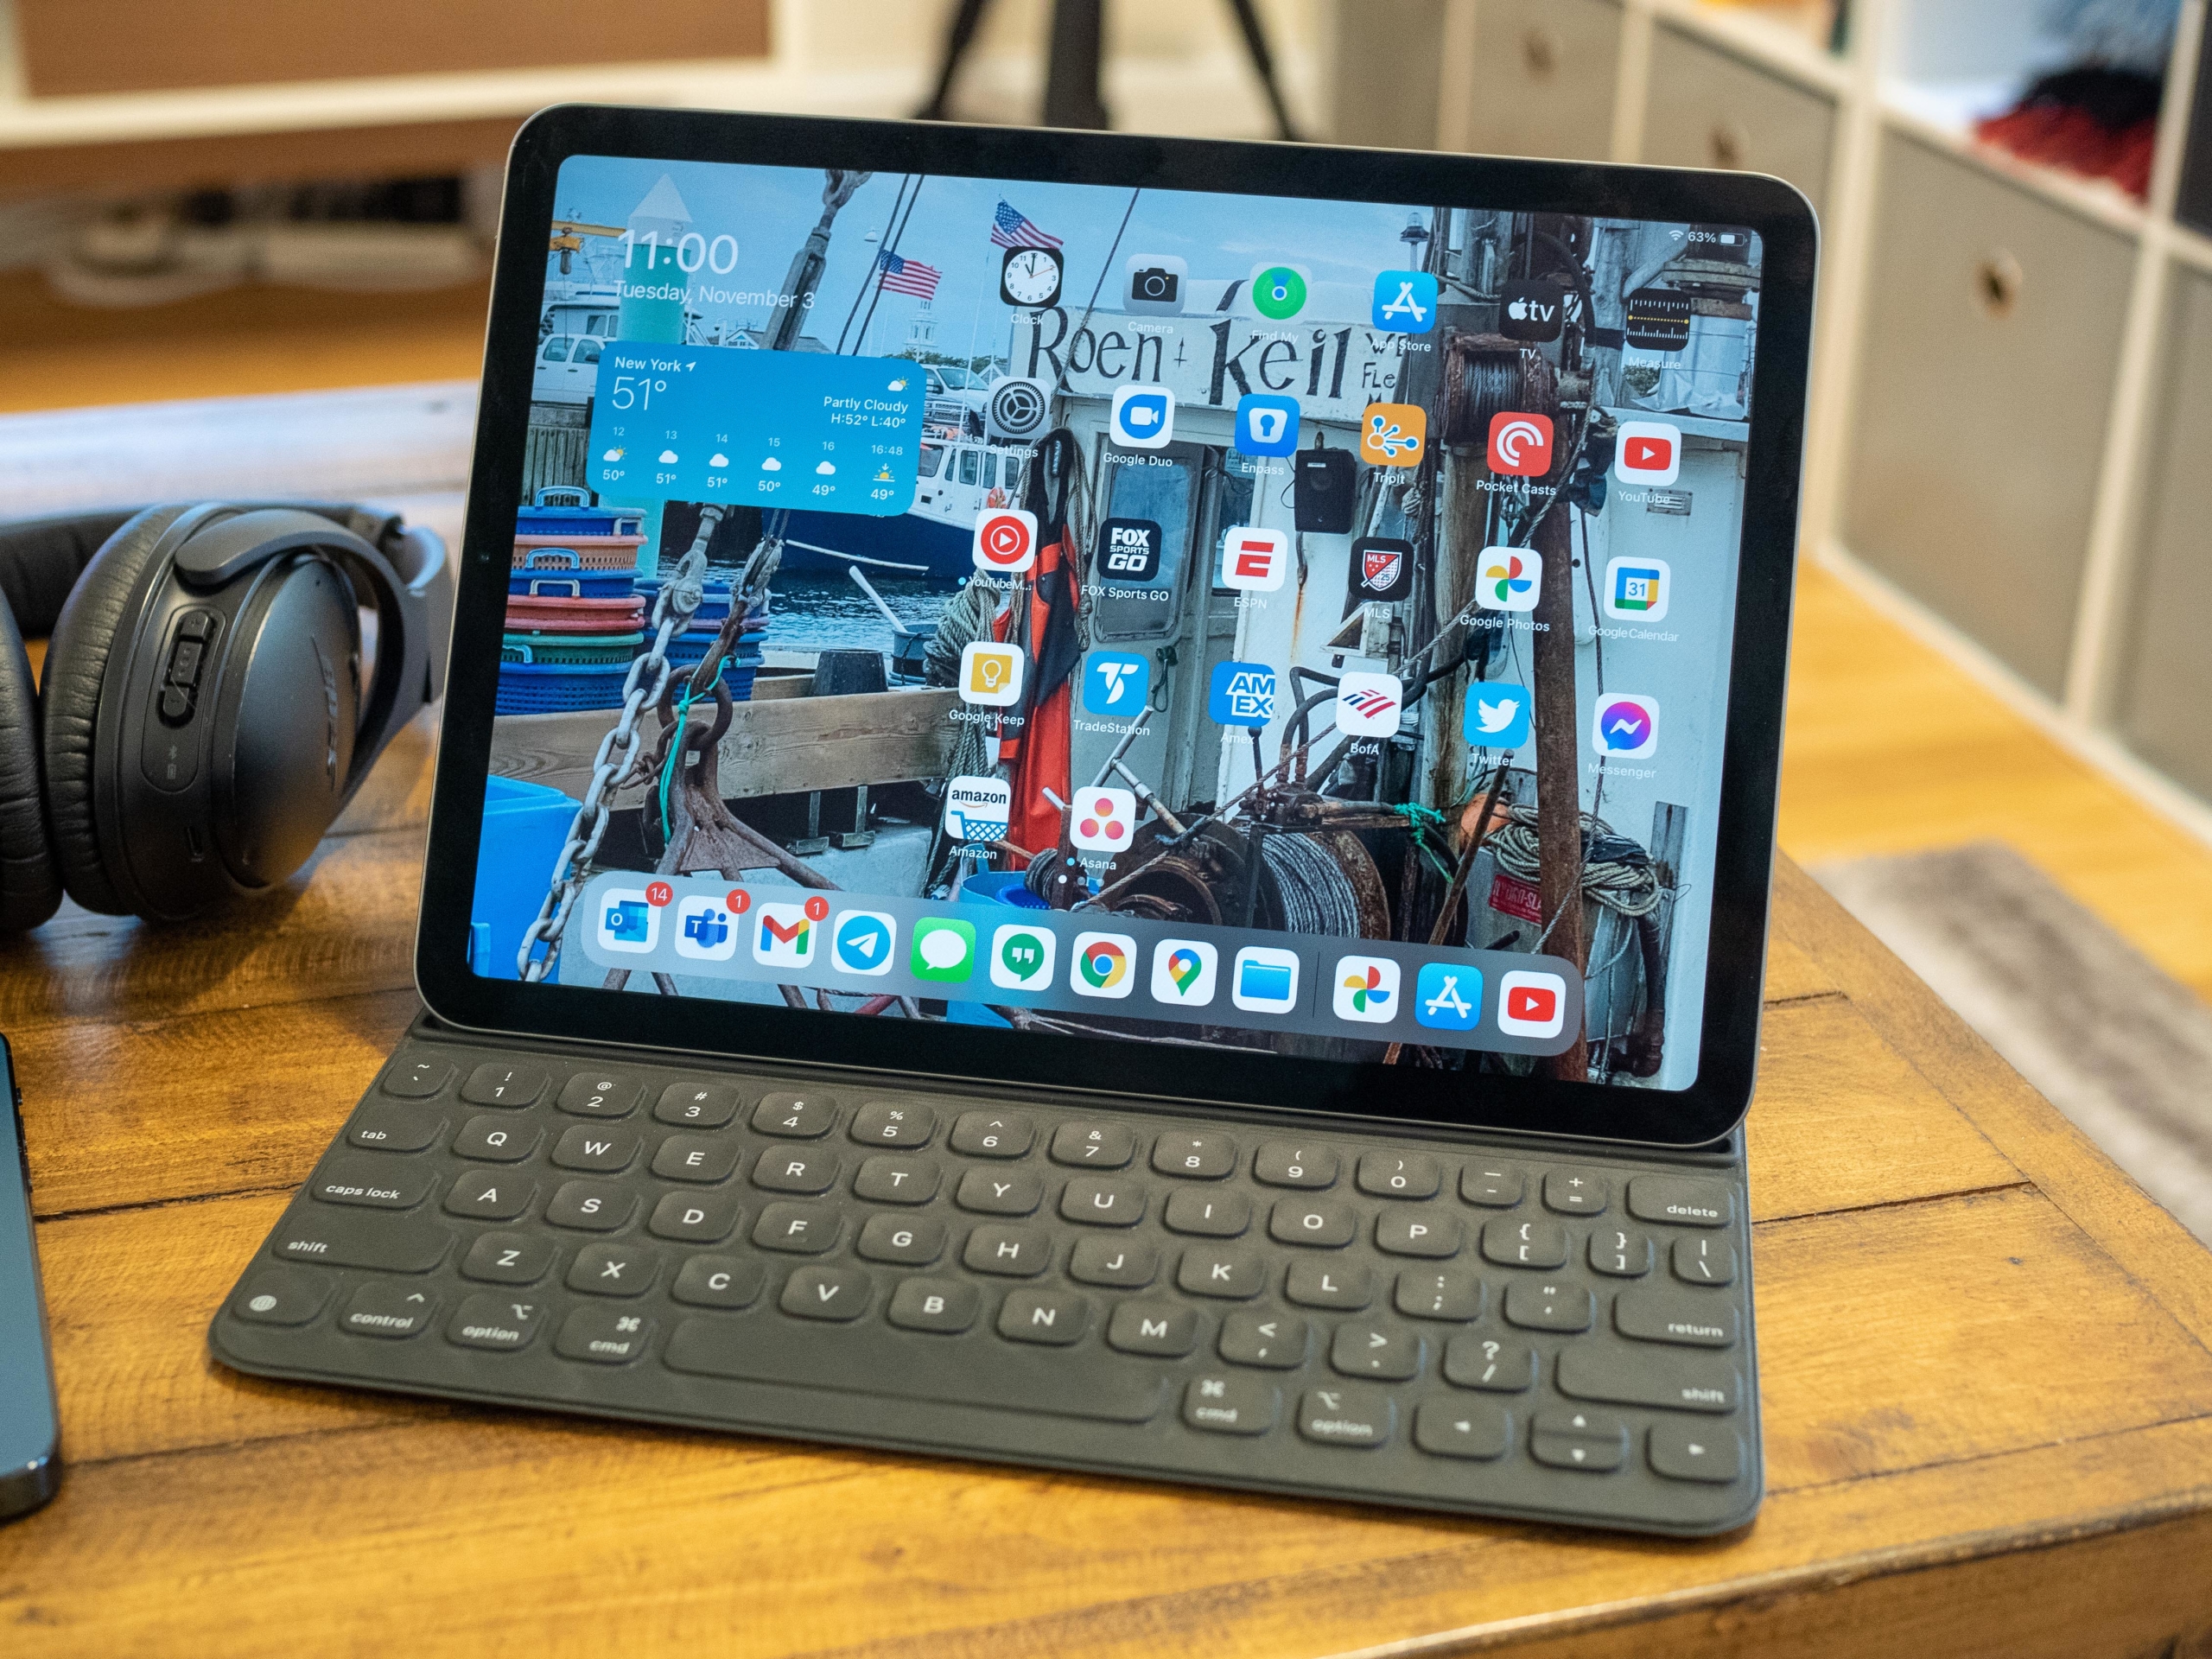 Apple iPad Air (2020) review: A Pro in all but name